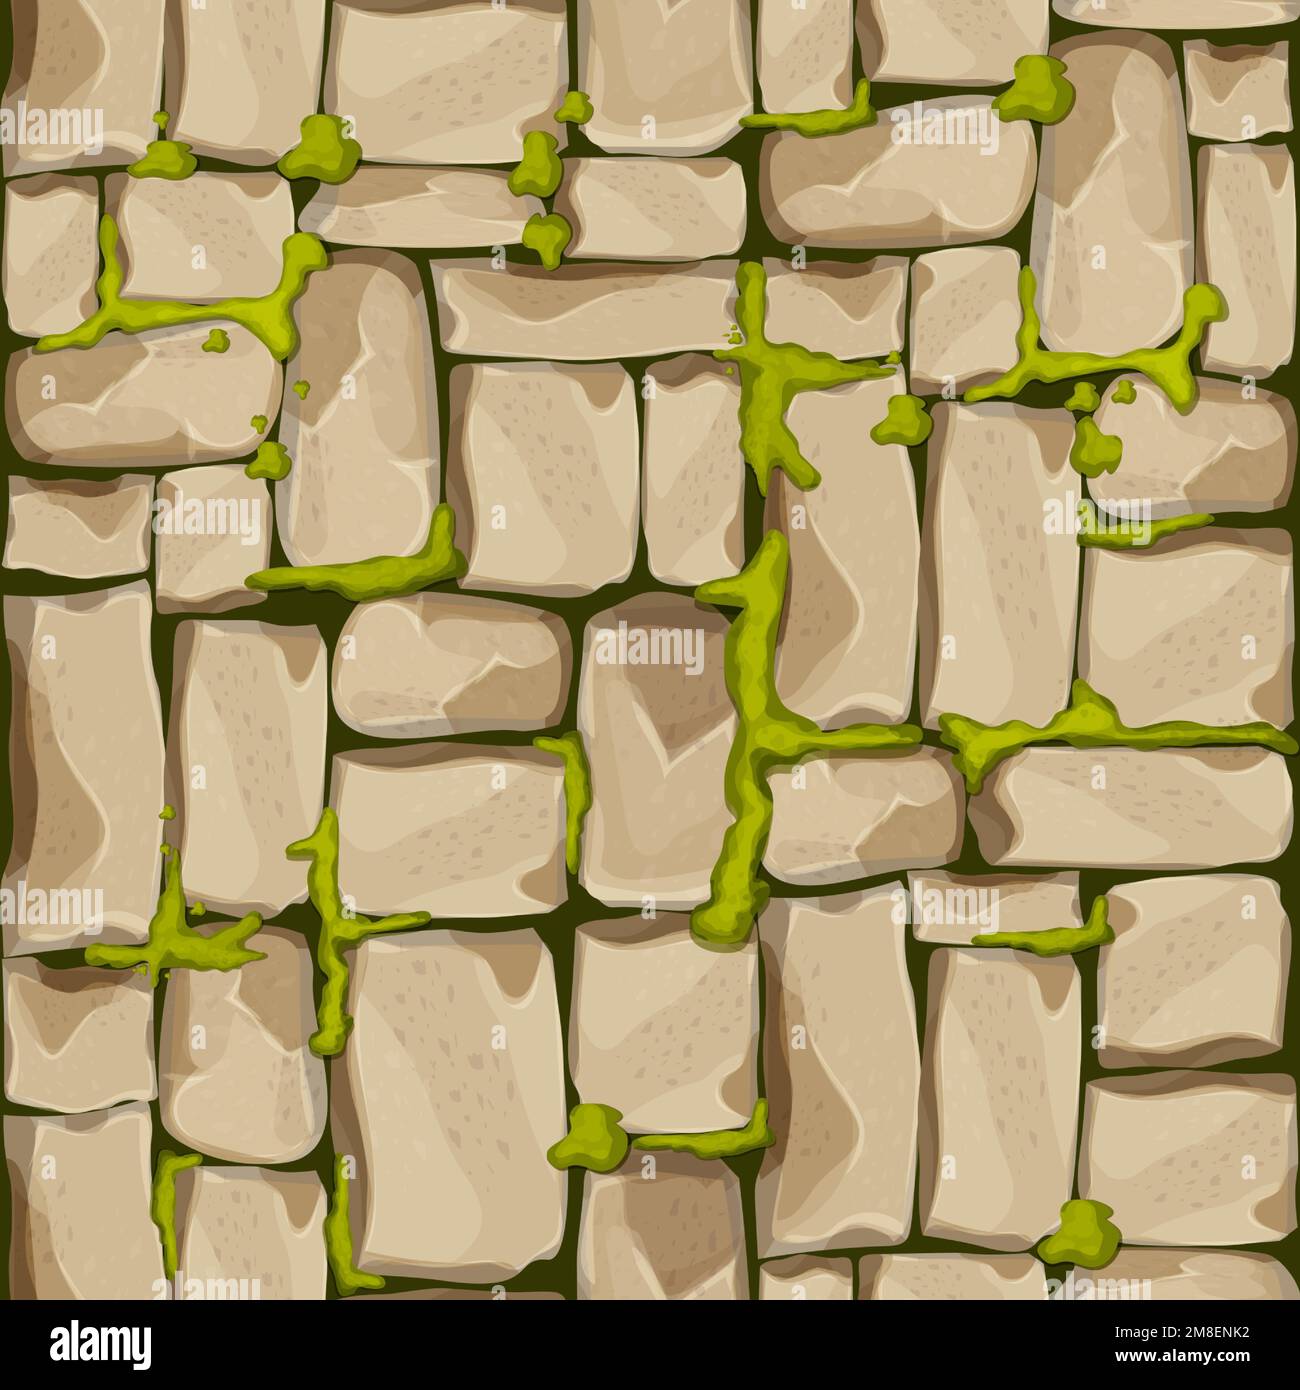 Stone wall, pavement from bricks, rocks with moss , game background in cartoon style, seamless textured surface. Ui game asset, road or floor material. Vector illustration Stock Vector